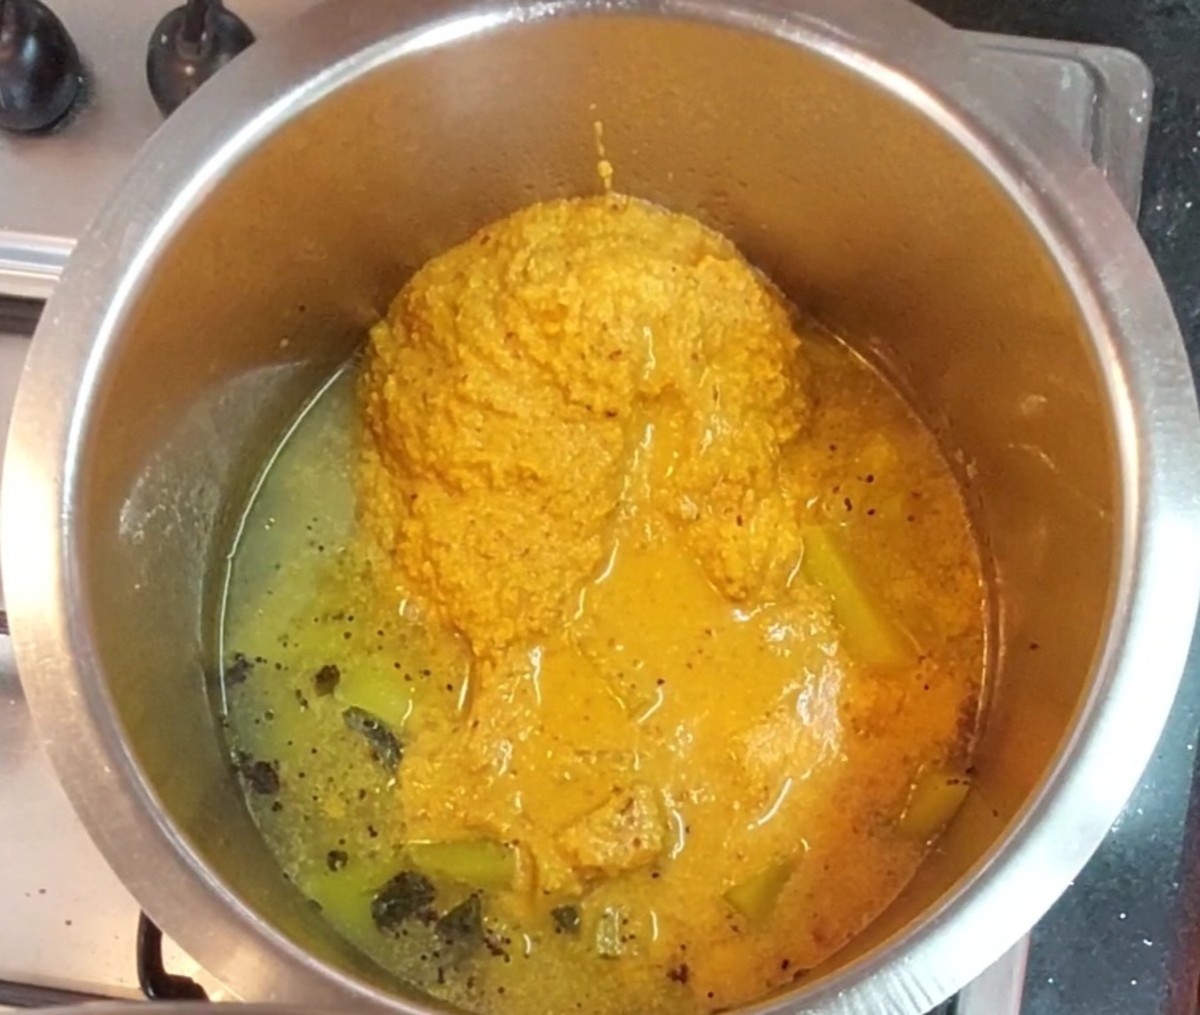 After the pumpkin is well-cooked, add the sambar and 1/2 cup water. Mix well.